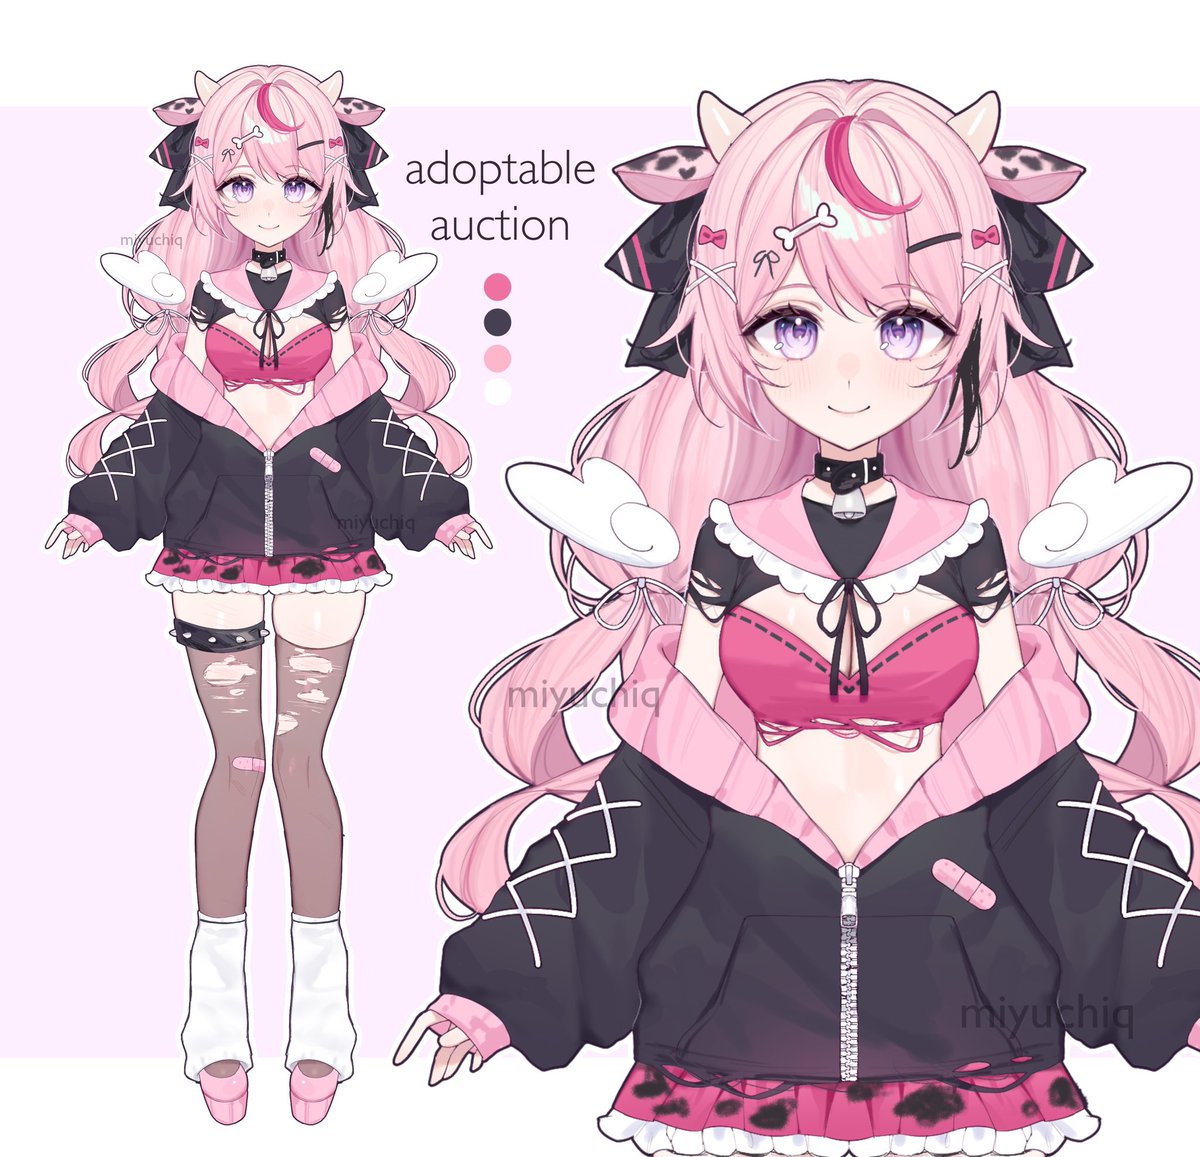 reupload 

🐮 ADOPTABLE auction

SB: $15
MIN: $1
AB1: $100 (personal use)
AB2: $300 ( commercial/vtuber use)

feel free to comment or DM for bid! 

🌷 payment: Boosty/HipoLink (works with cards and paypal)
auction below / extra info below

#adoptable #adoptauction